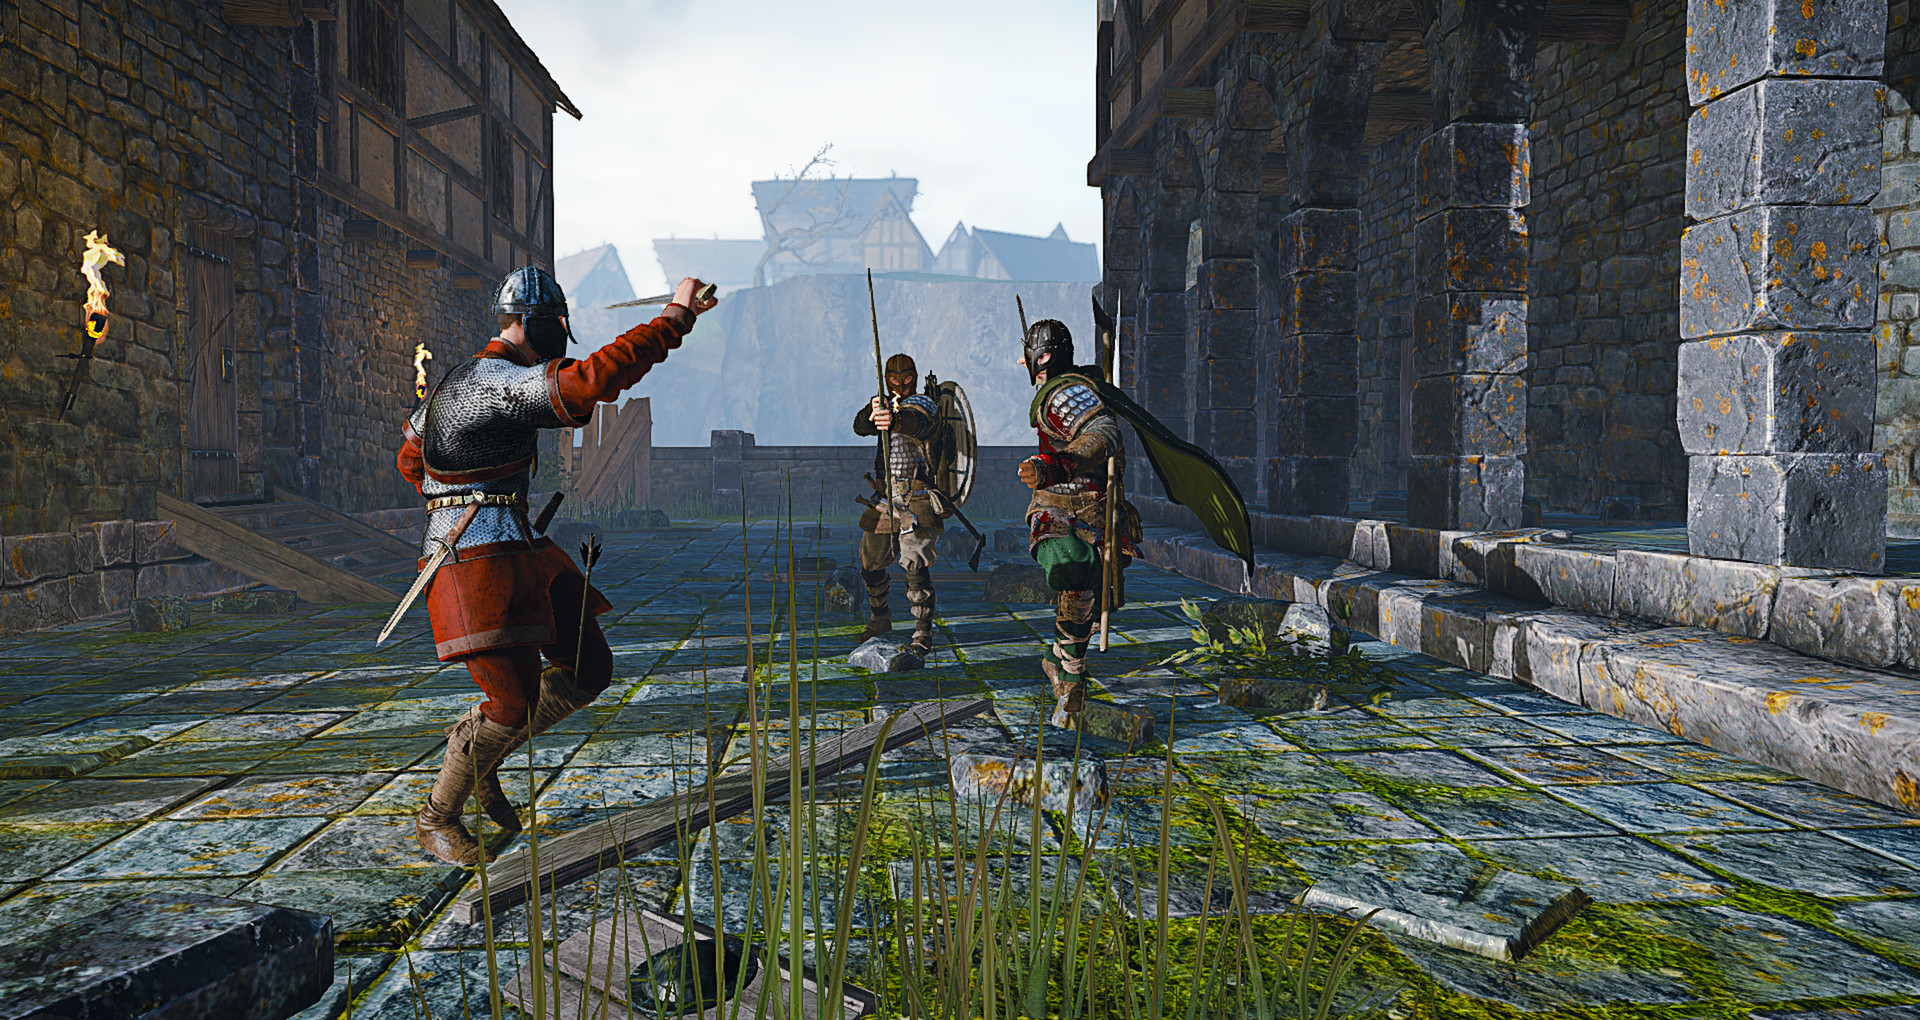 15 Best Medieval Games To Play Updated 2019 Ordinary Reviews - Photos